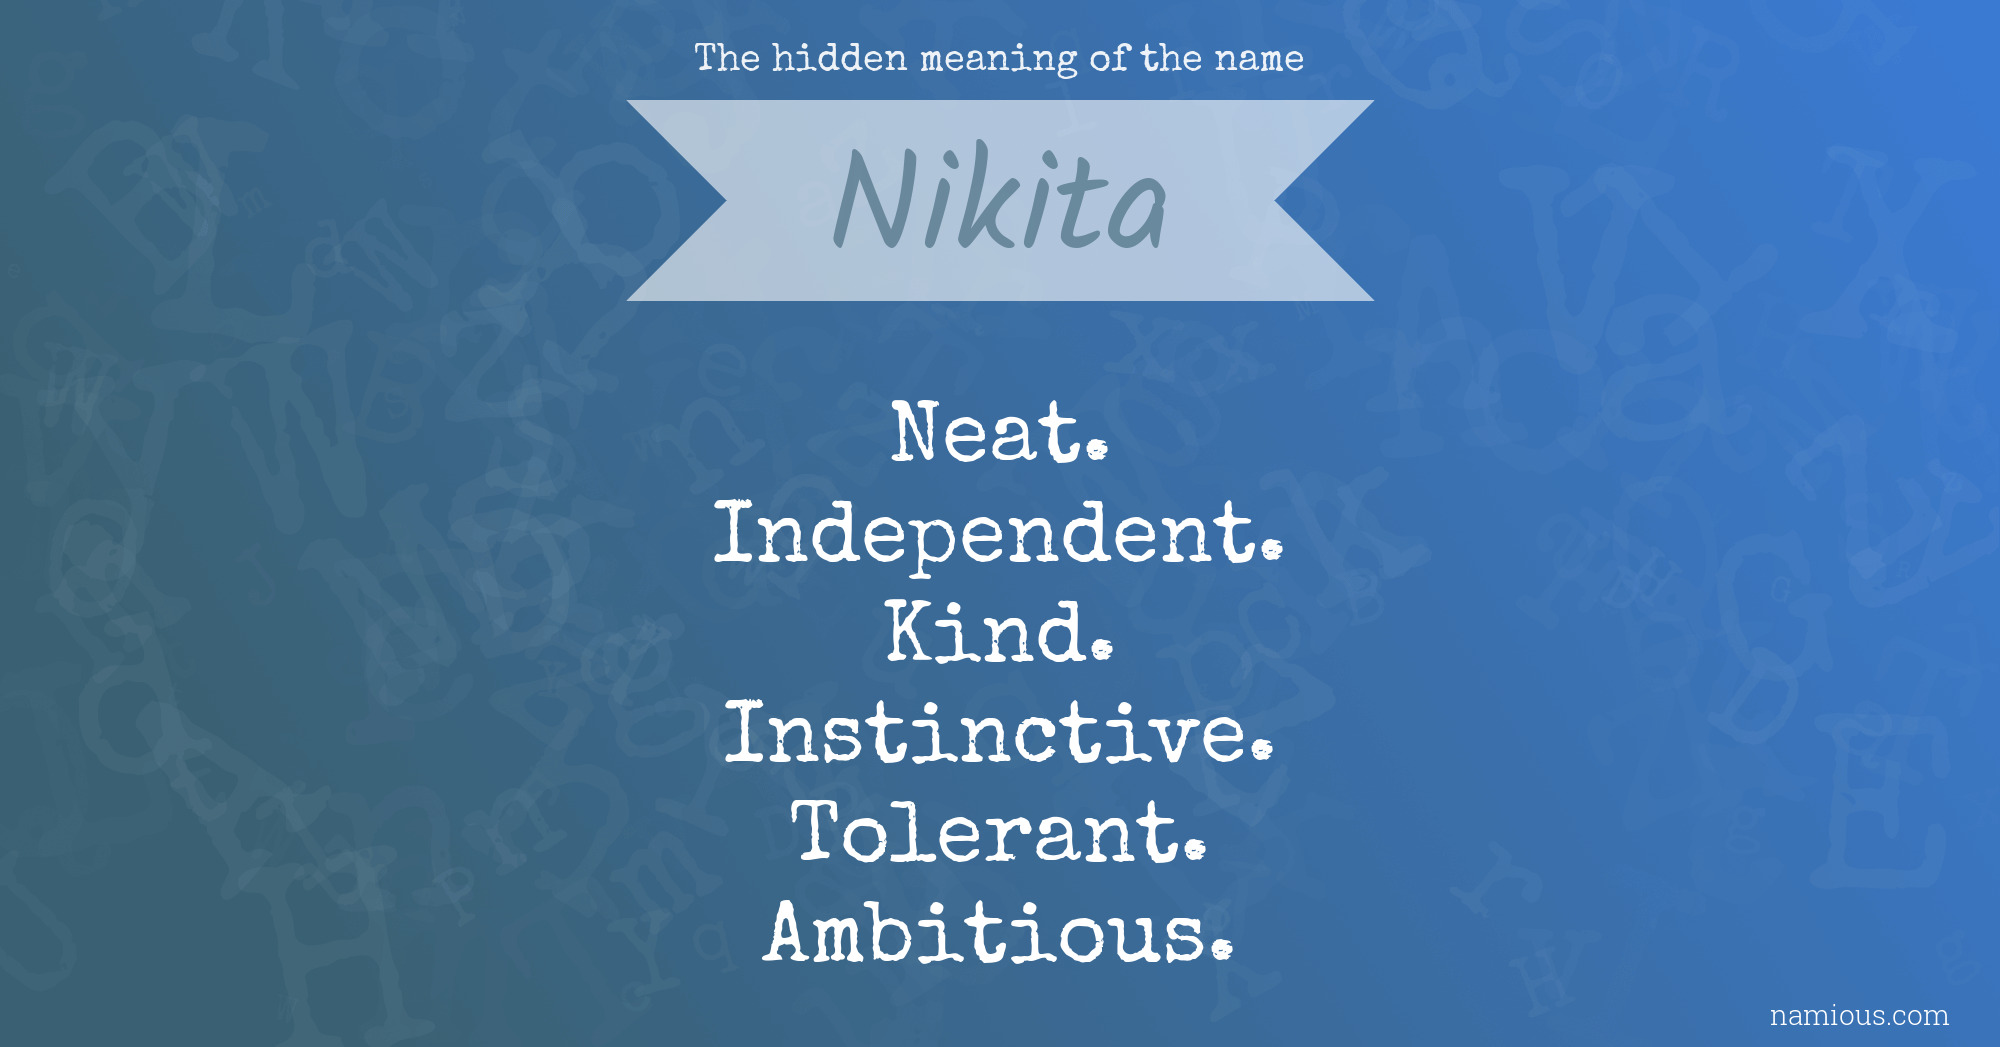 The hidden meaning of the name Nikita